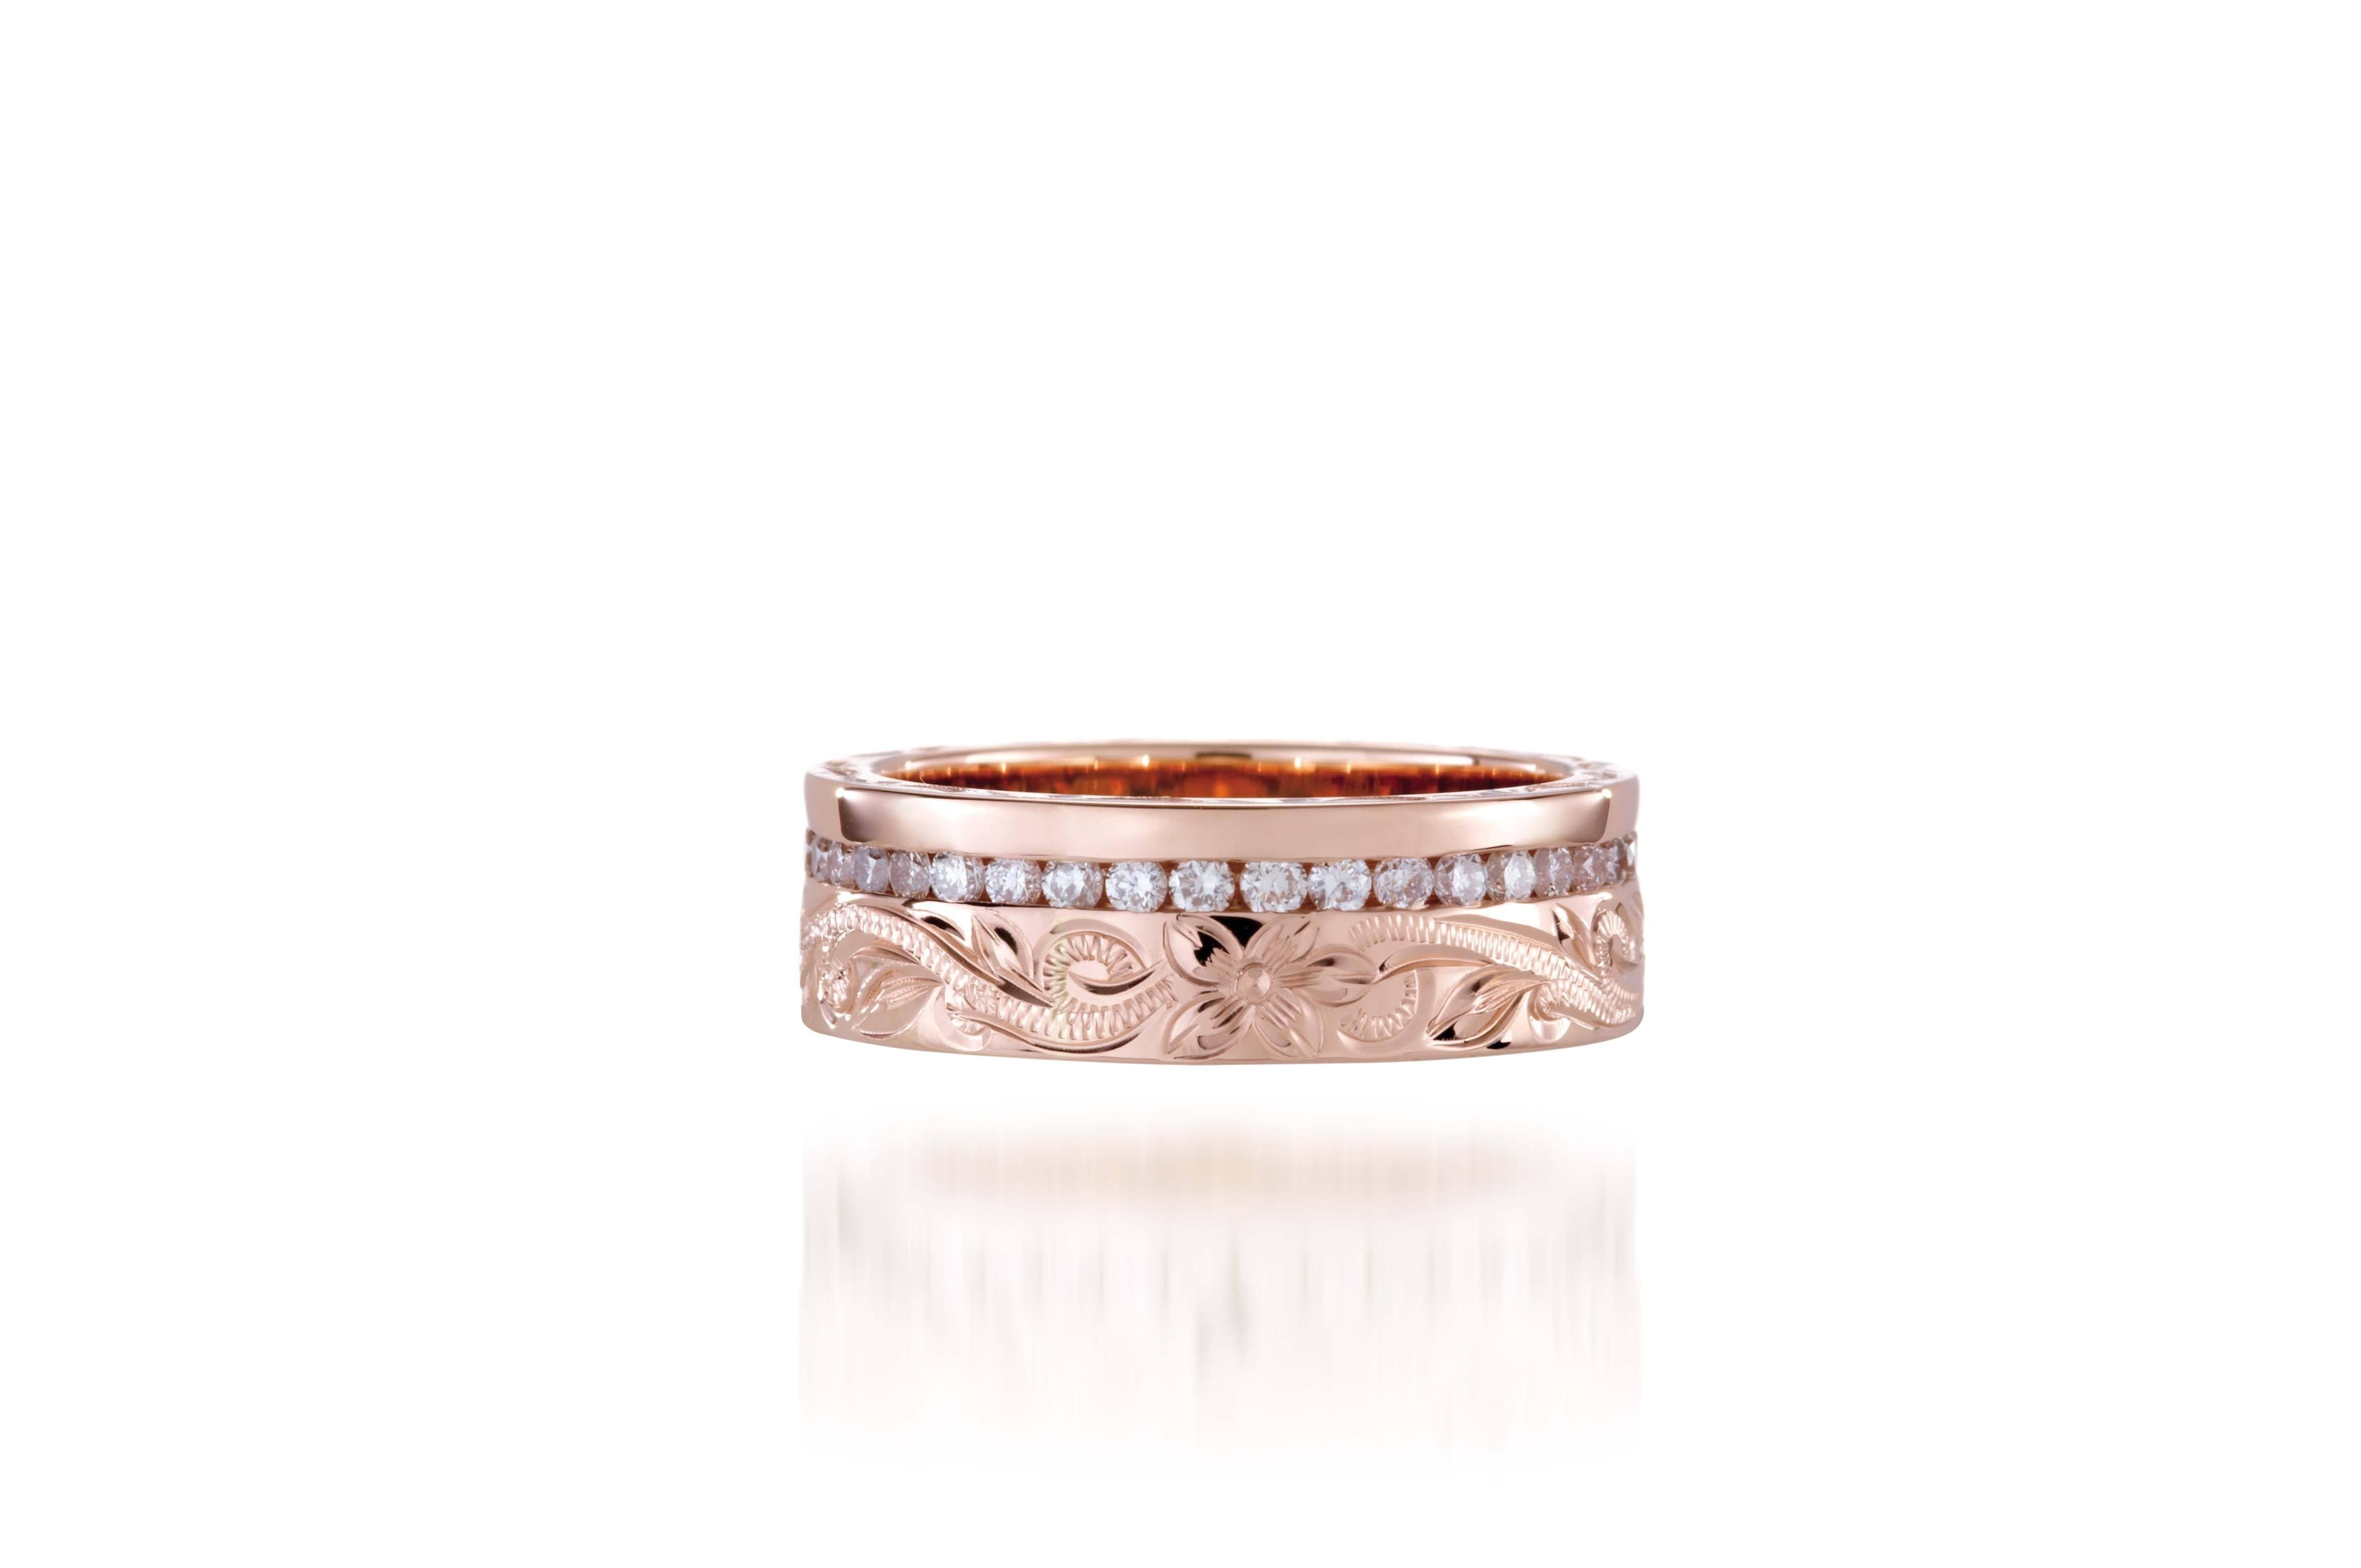 In this photo there is a rose gold ring with diamonds and hand engravings that include a flower and scroll.